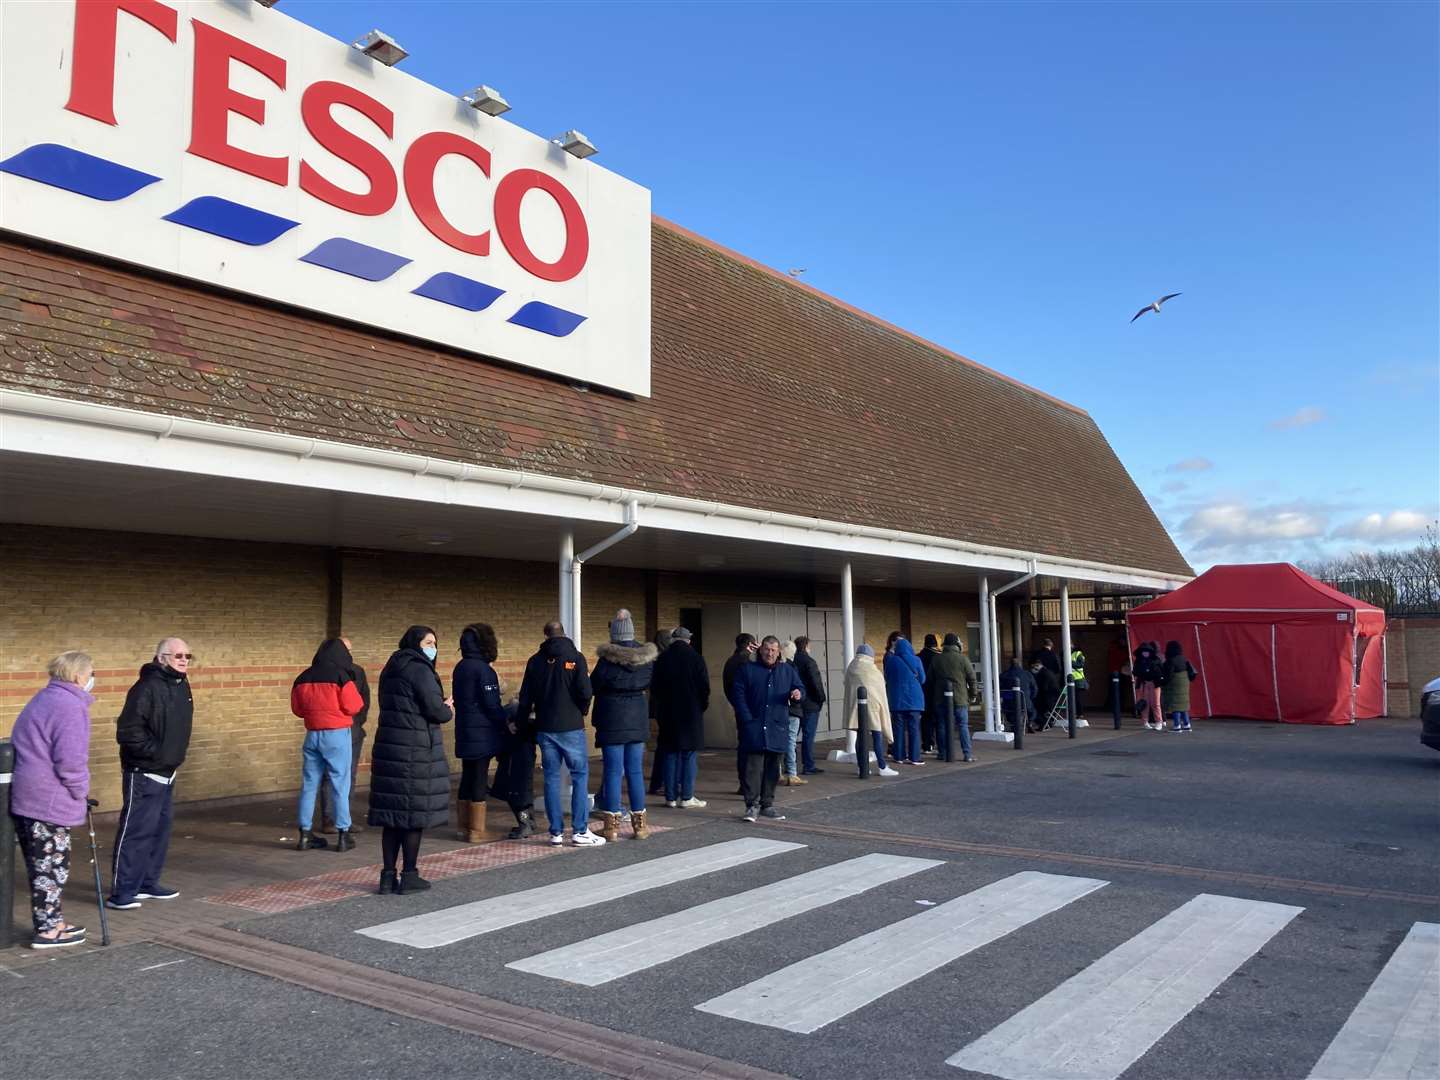 The queue to have a Covid booster jab stretched around Tesco supermarket in Bridge Road, Sheerness